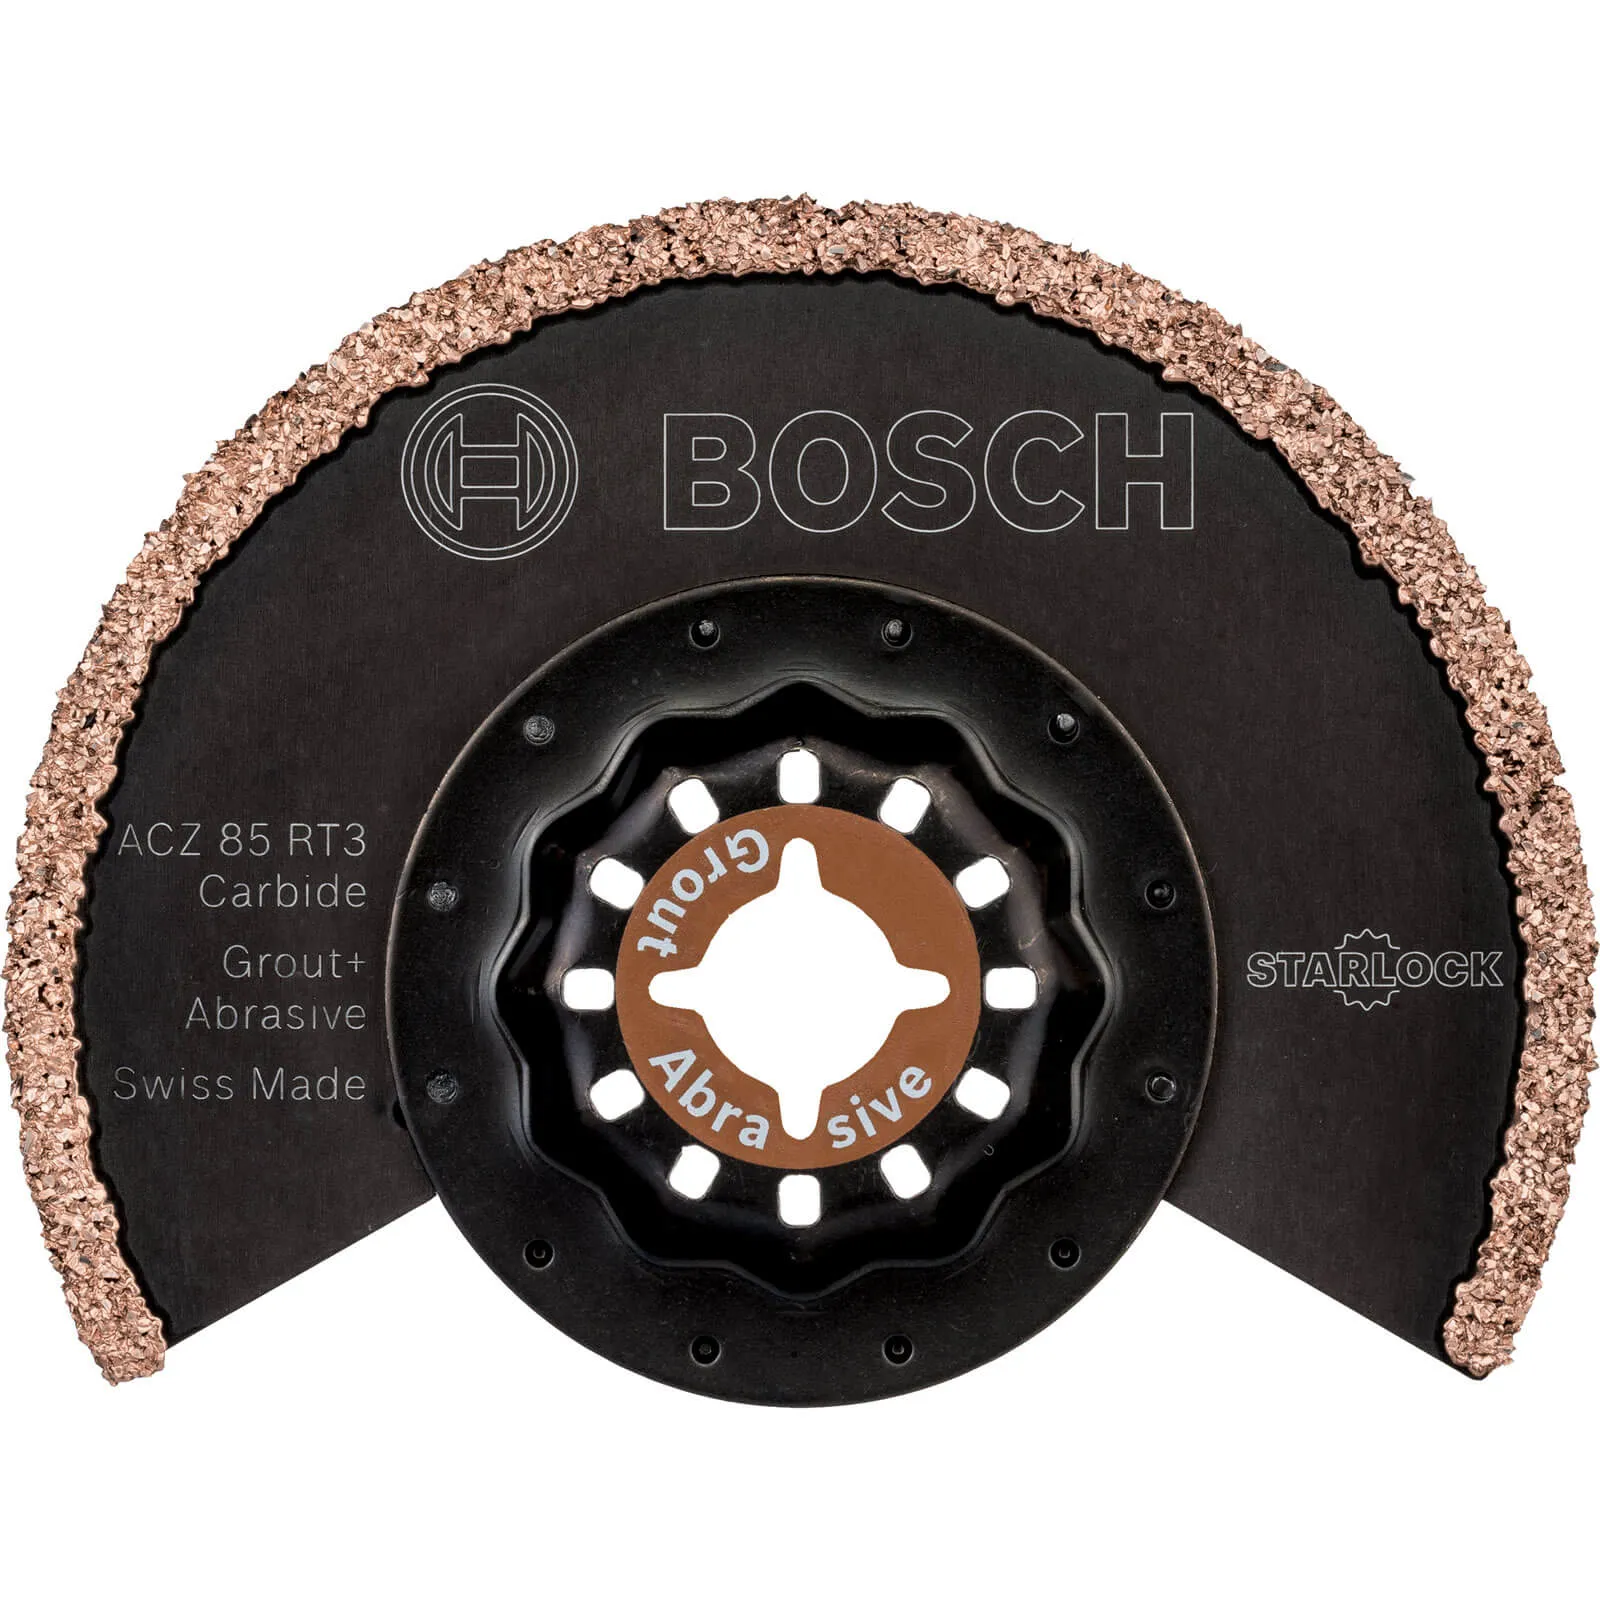 Bosch ACZ 85 RT3 Grout and Masonry Oscillating Multi Tool Segment Saw Blade - 85mm, Pack of 1